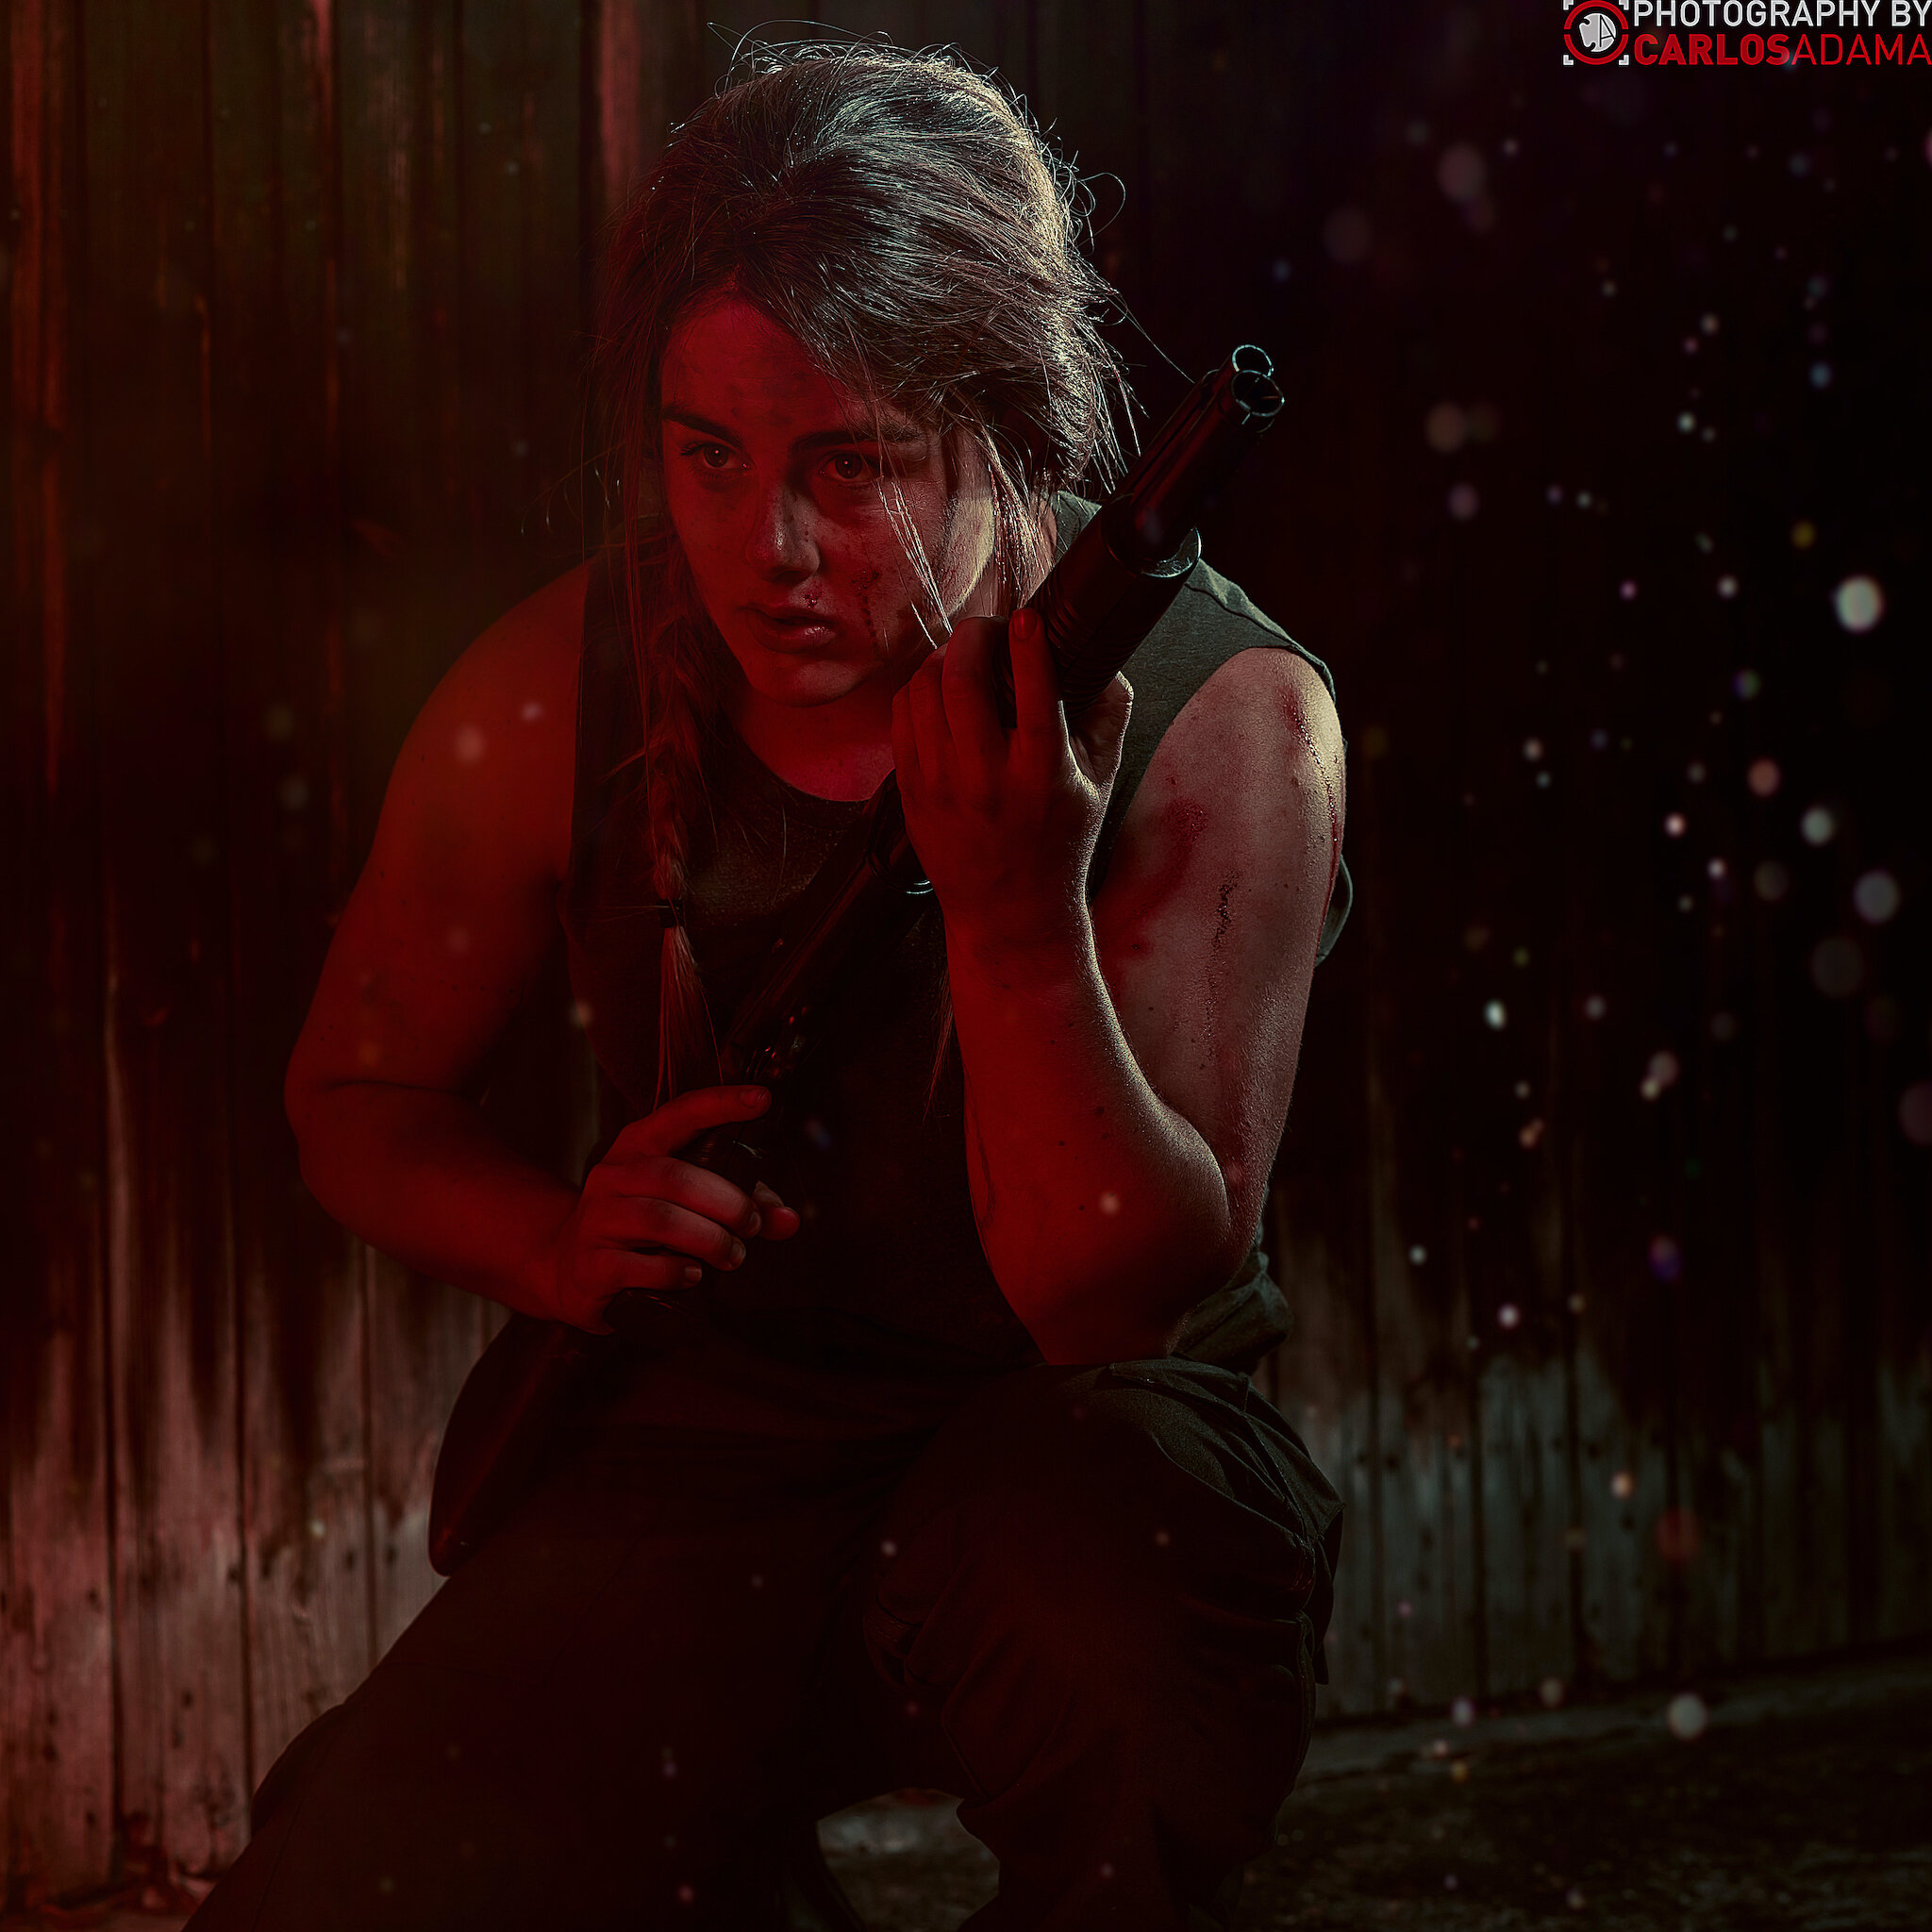 Jocelyn Mettler, the face model of Abby in 'The Last of Us Part II',  cosplays her in-game character